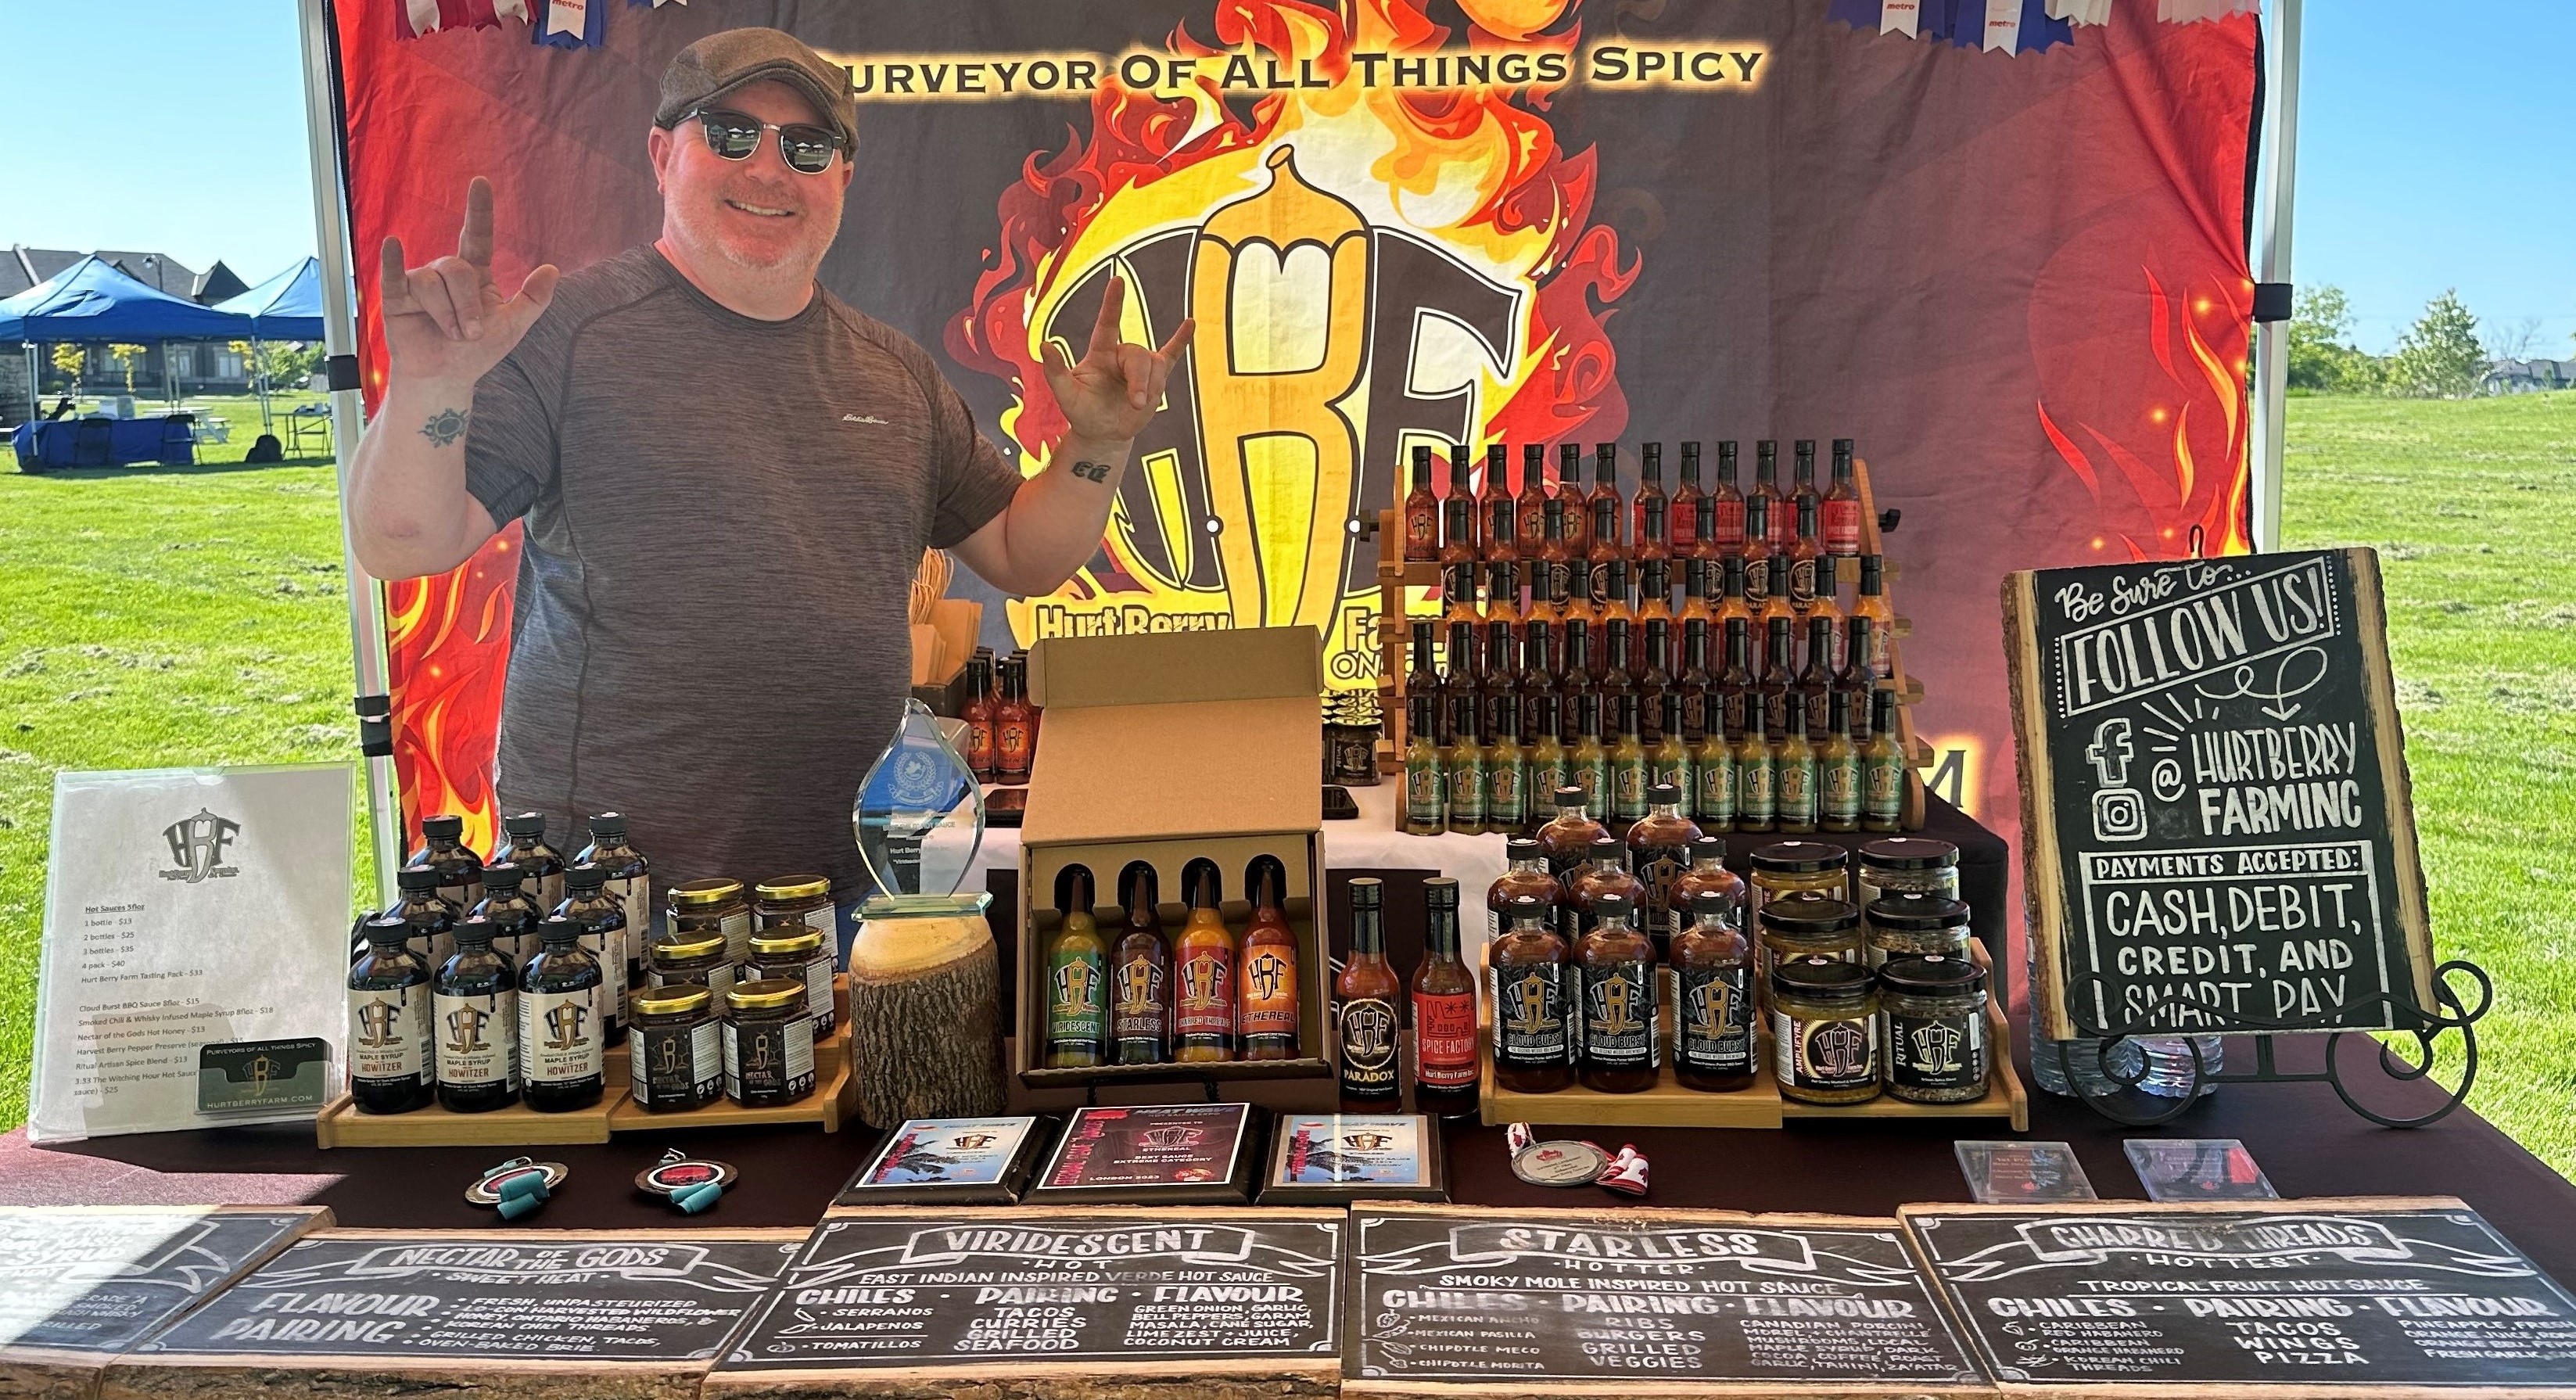 Vendor at the market selling hot sauce